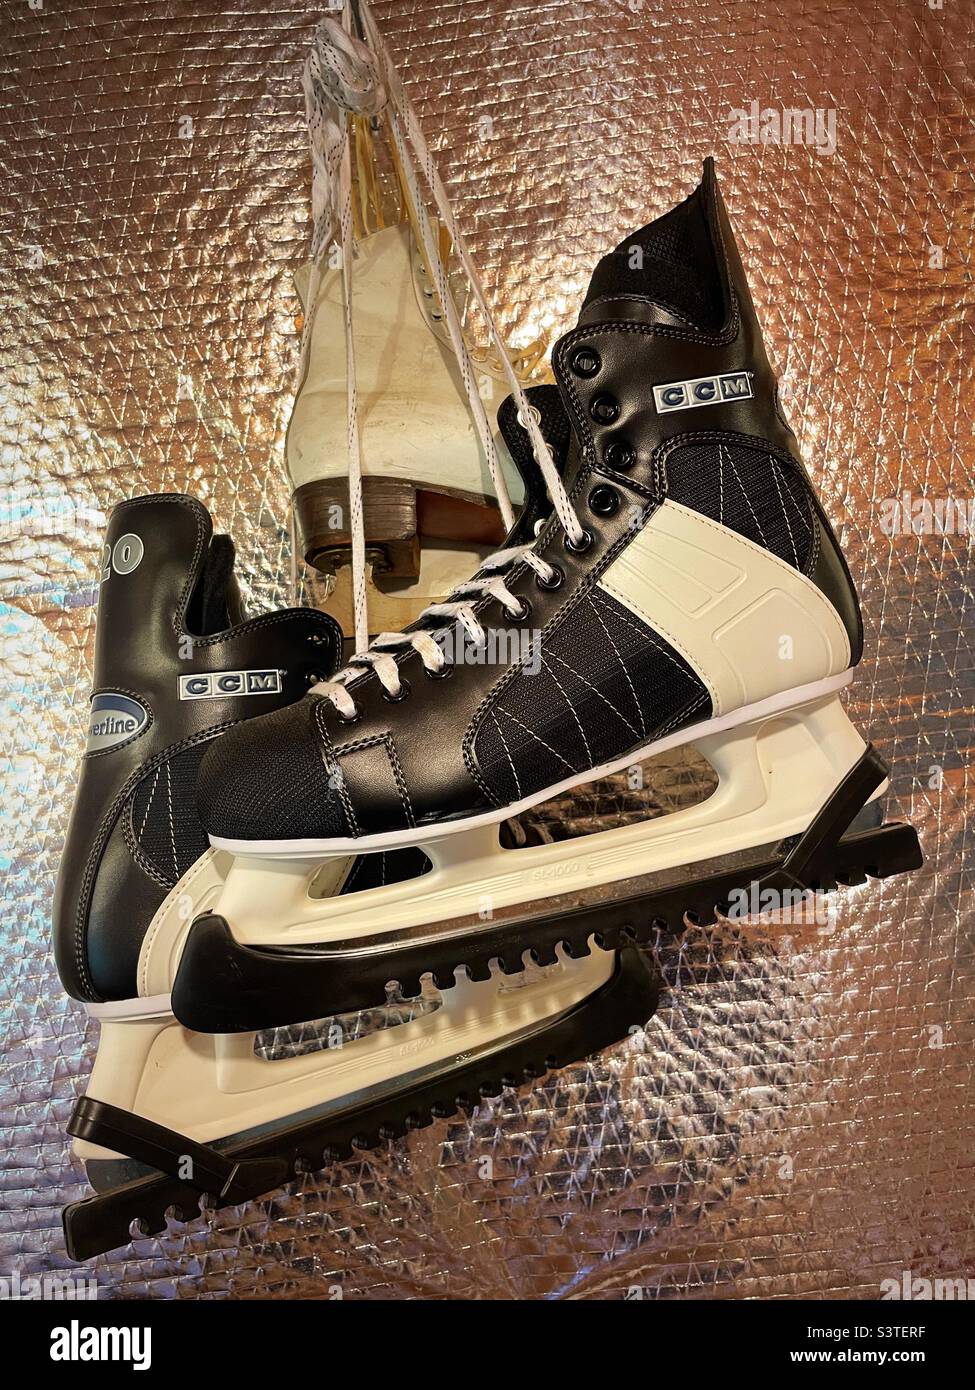 https://c8.alamy.com/comp/S3TERF/a-pair-of-mens-ice-skates-hanging-from-a-nail-2022-usa-S3TERF.jpg